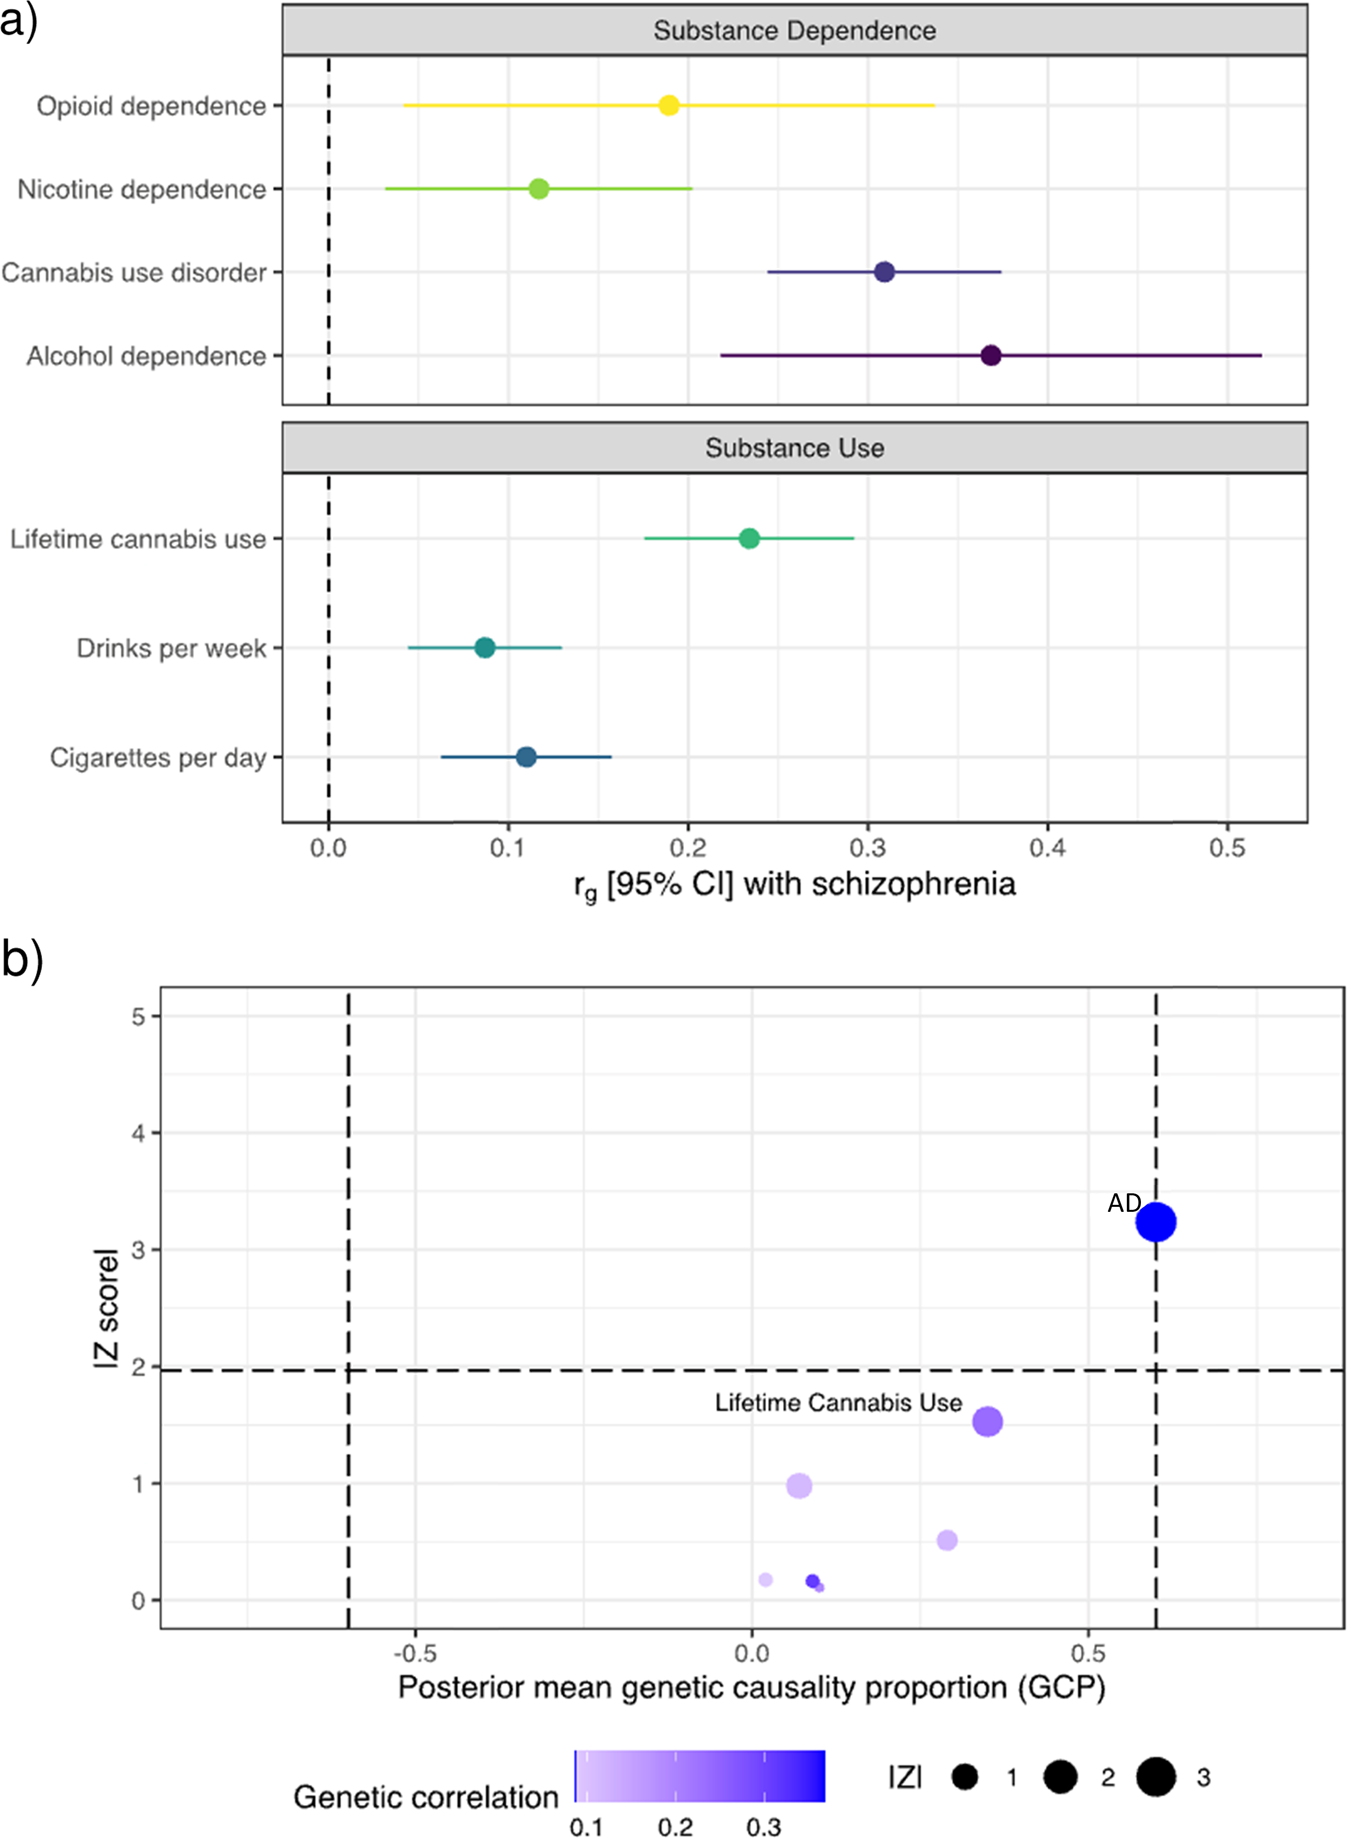 Pairwise genetic meta-analyses between schizophrenia and substance  dependence phenotypes reveals novel association signals with  pharmacological significance | Translational Psychiatry